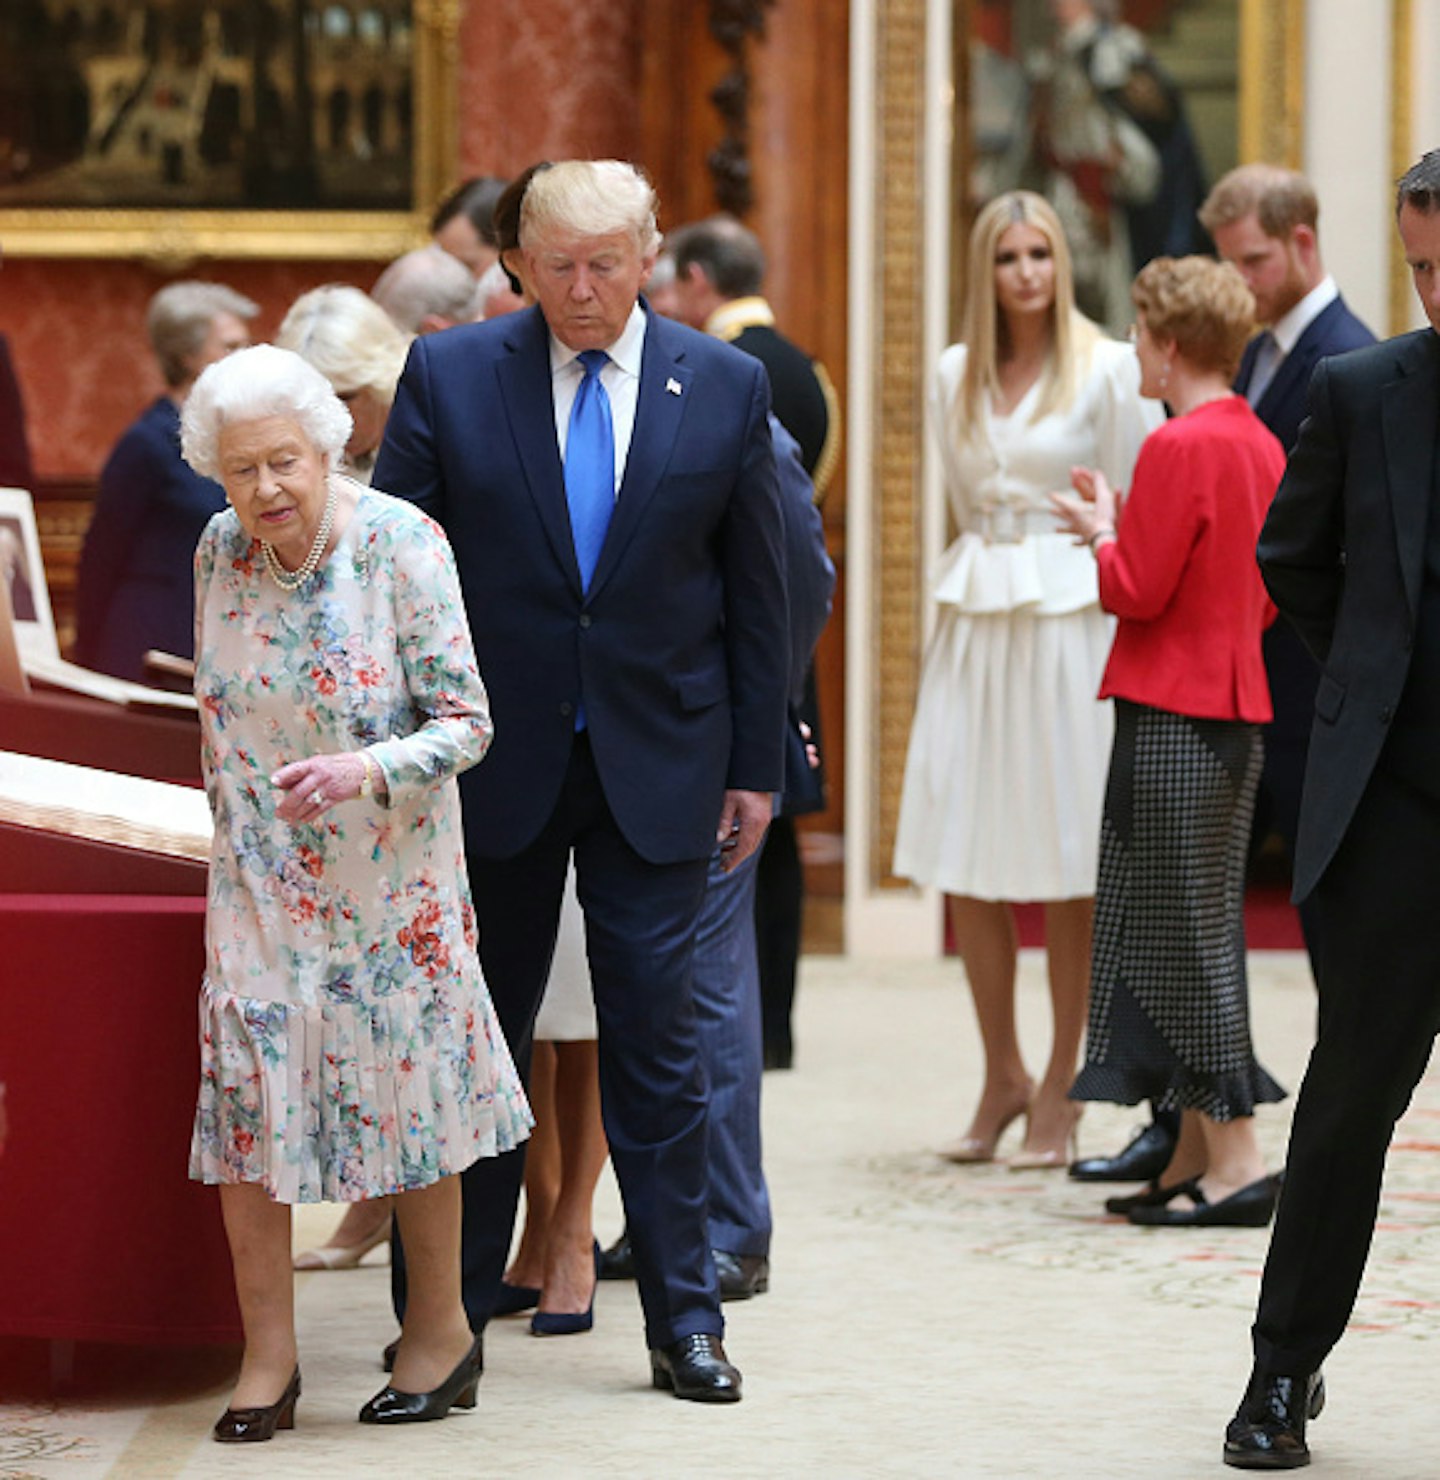 The Queen, Donald Trump and Price Harry